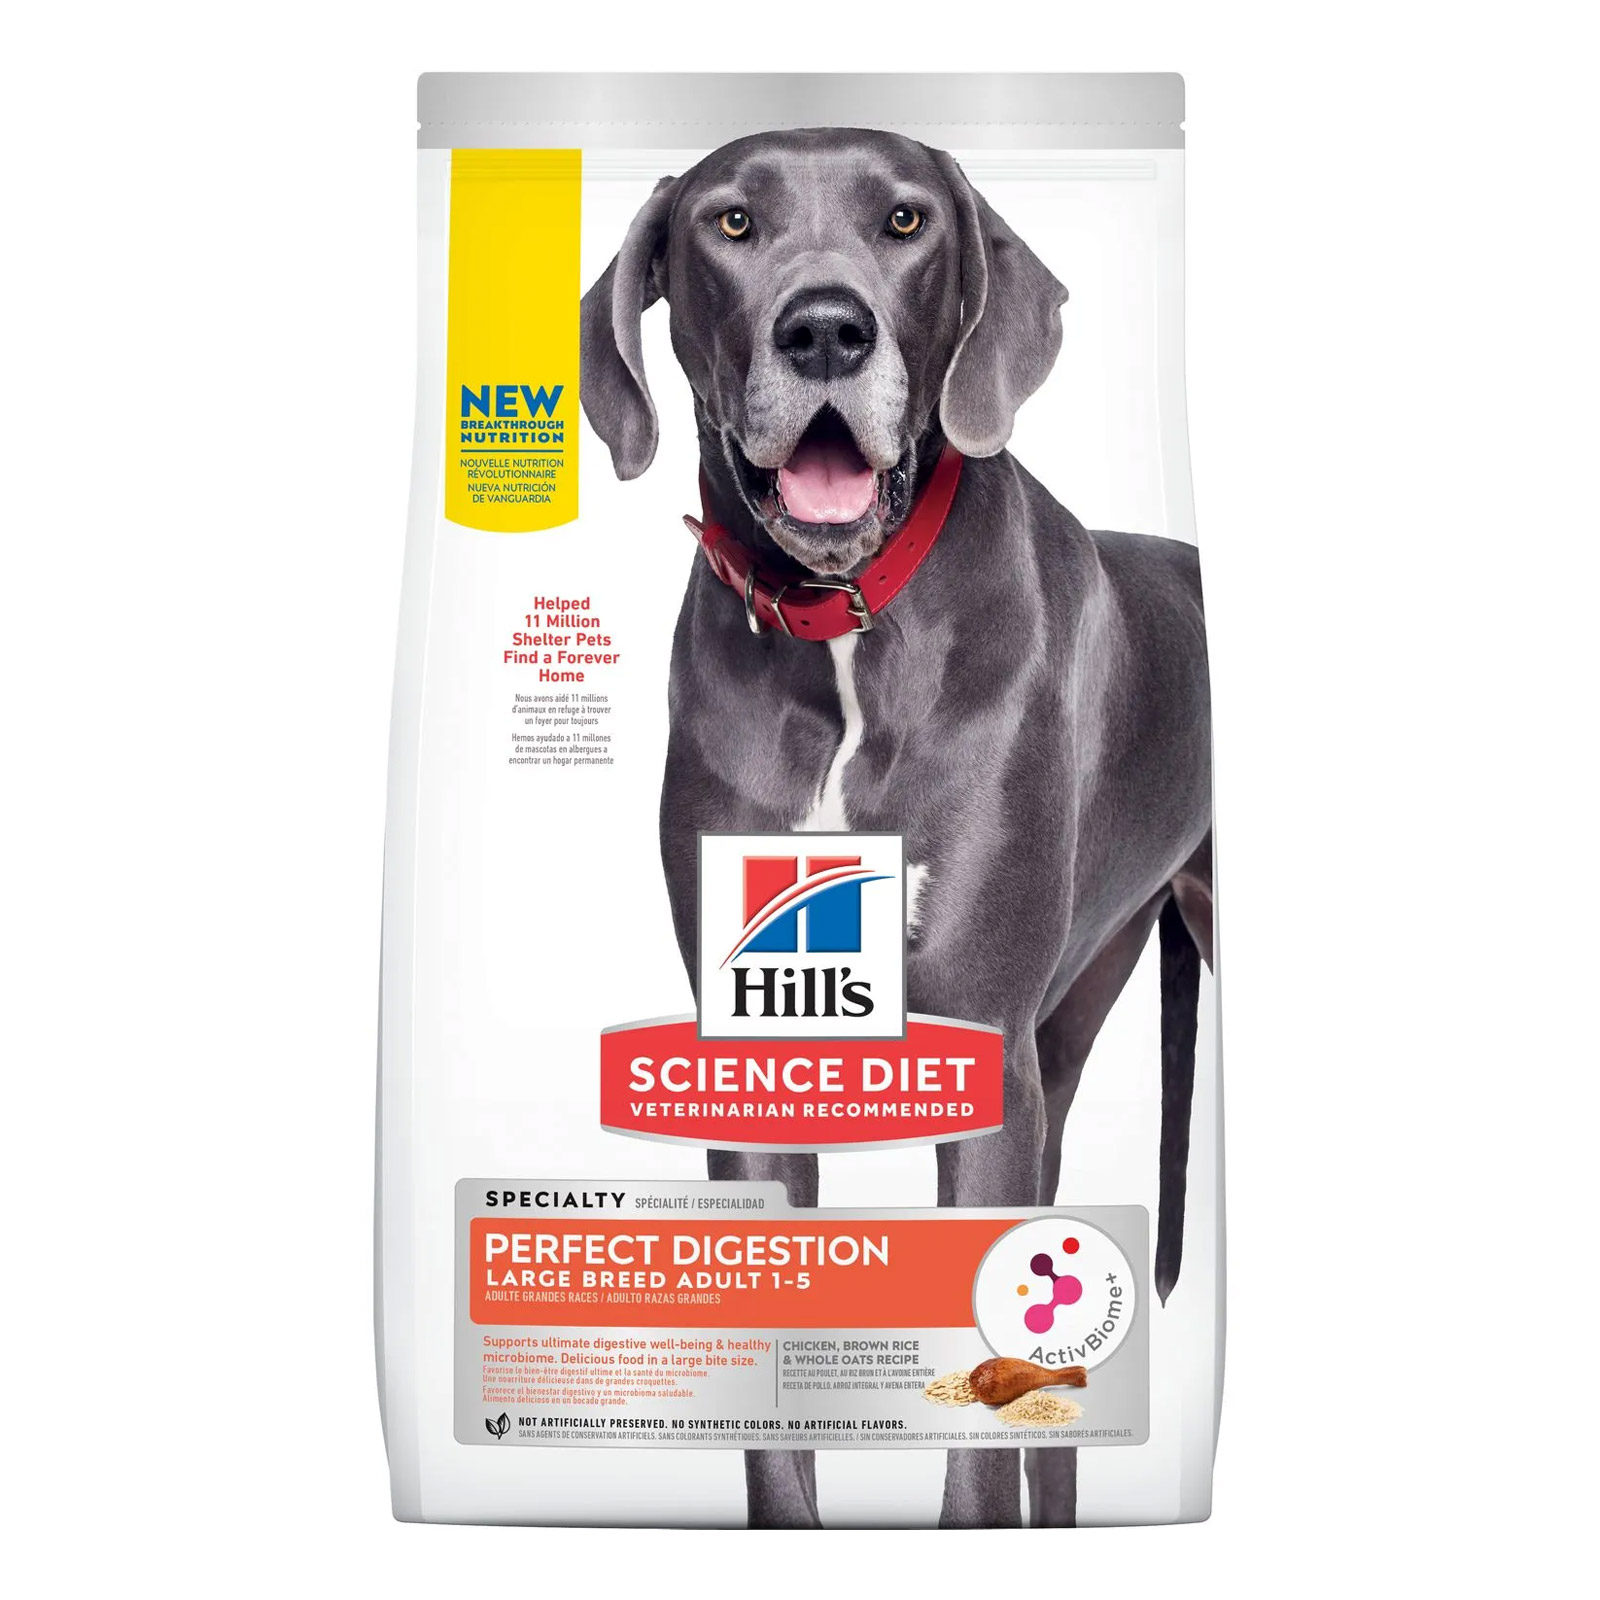 Hill's Science Diet Perfect Digestion Large Breed Dog Food for Food